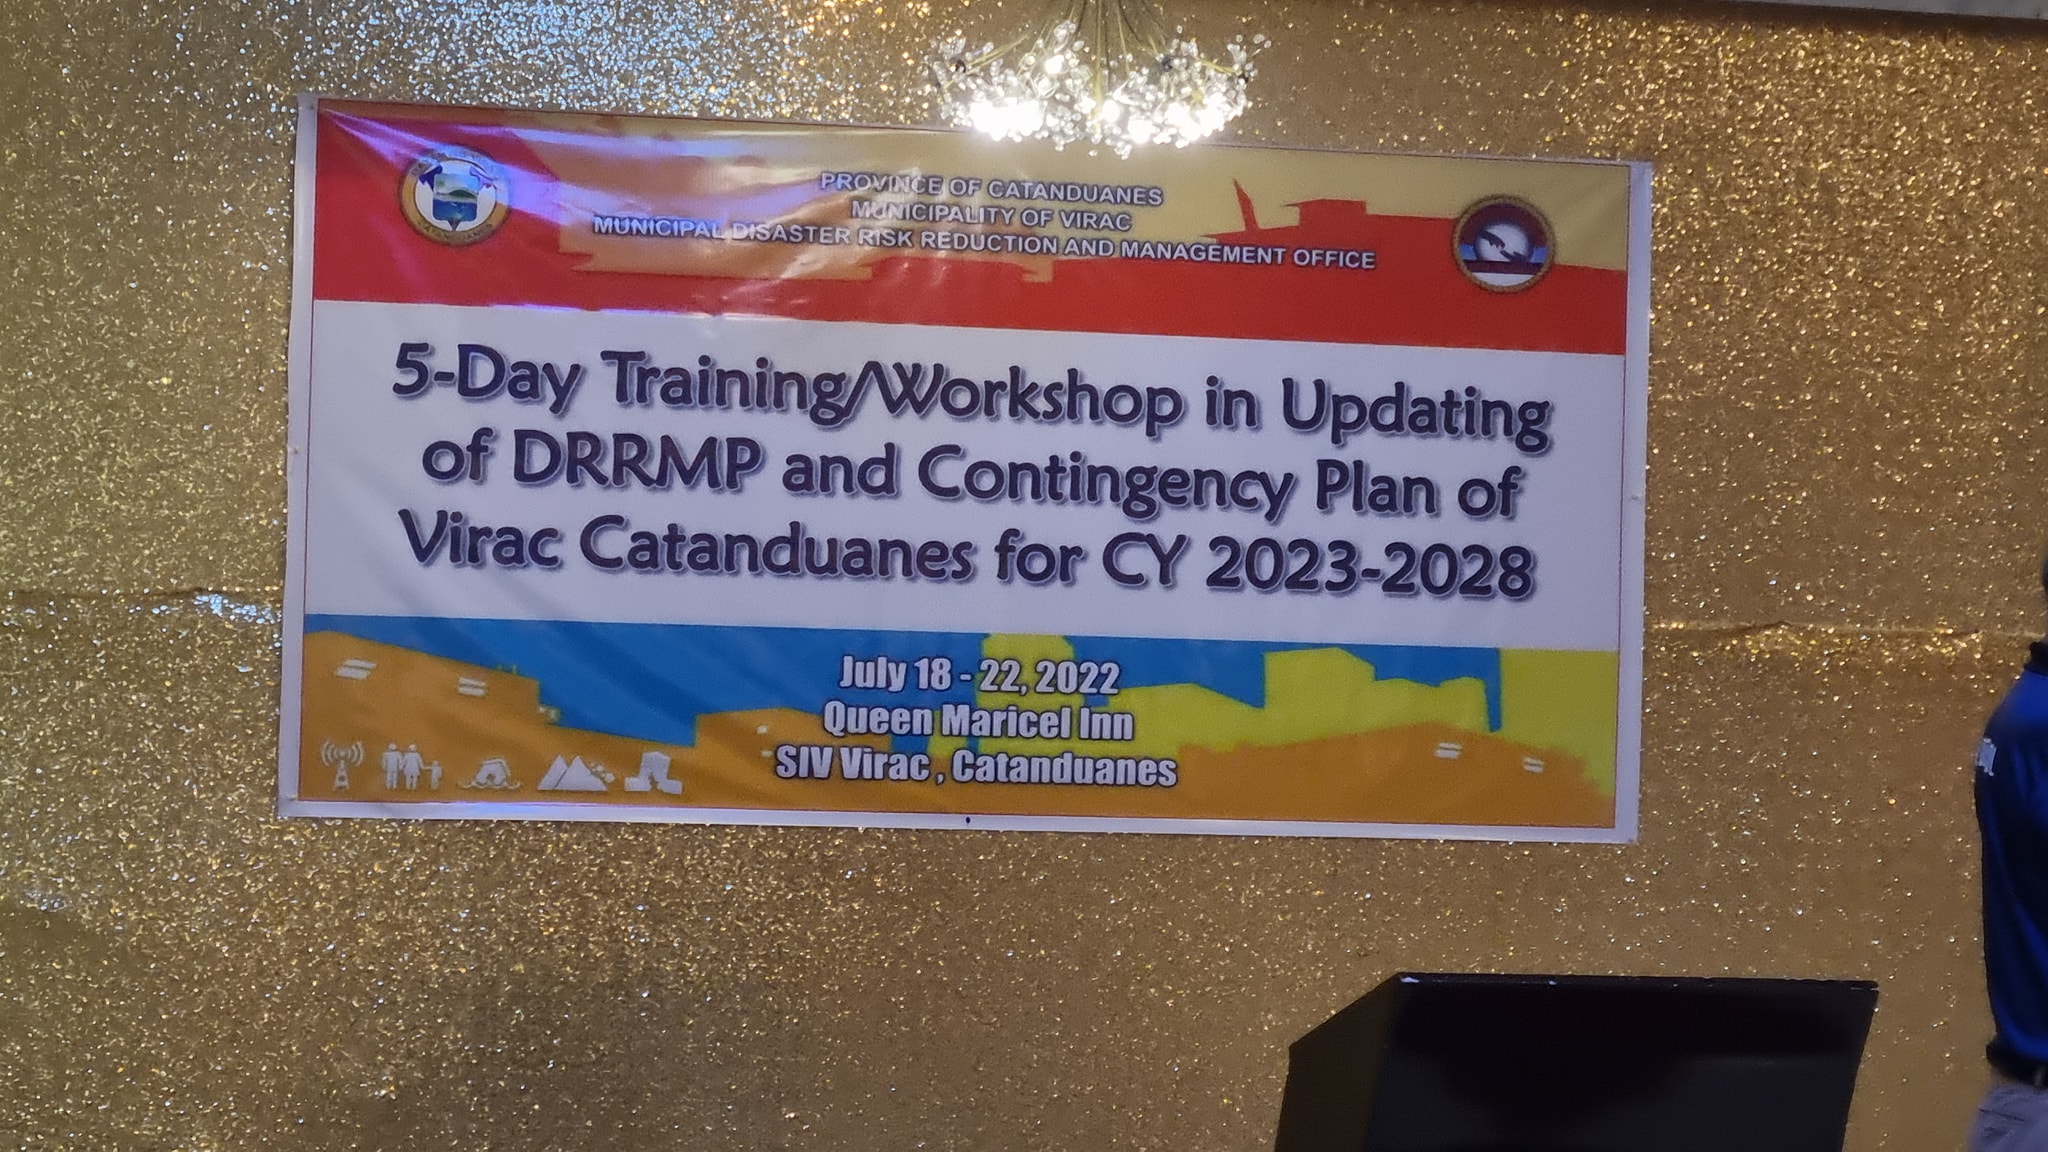 Virac spearheads training on updating of DRRM, contingency plans